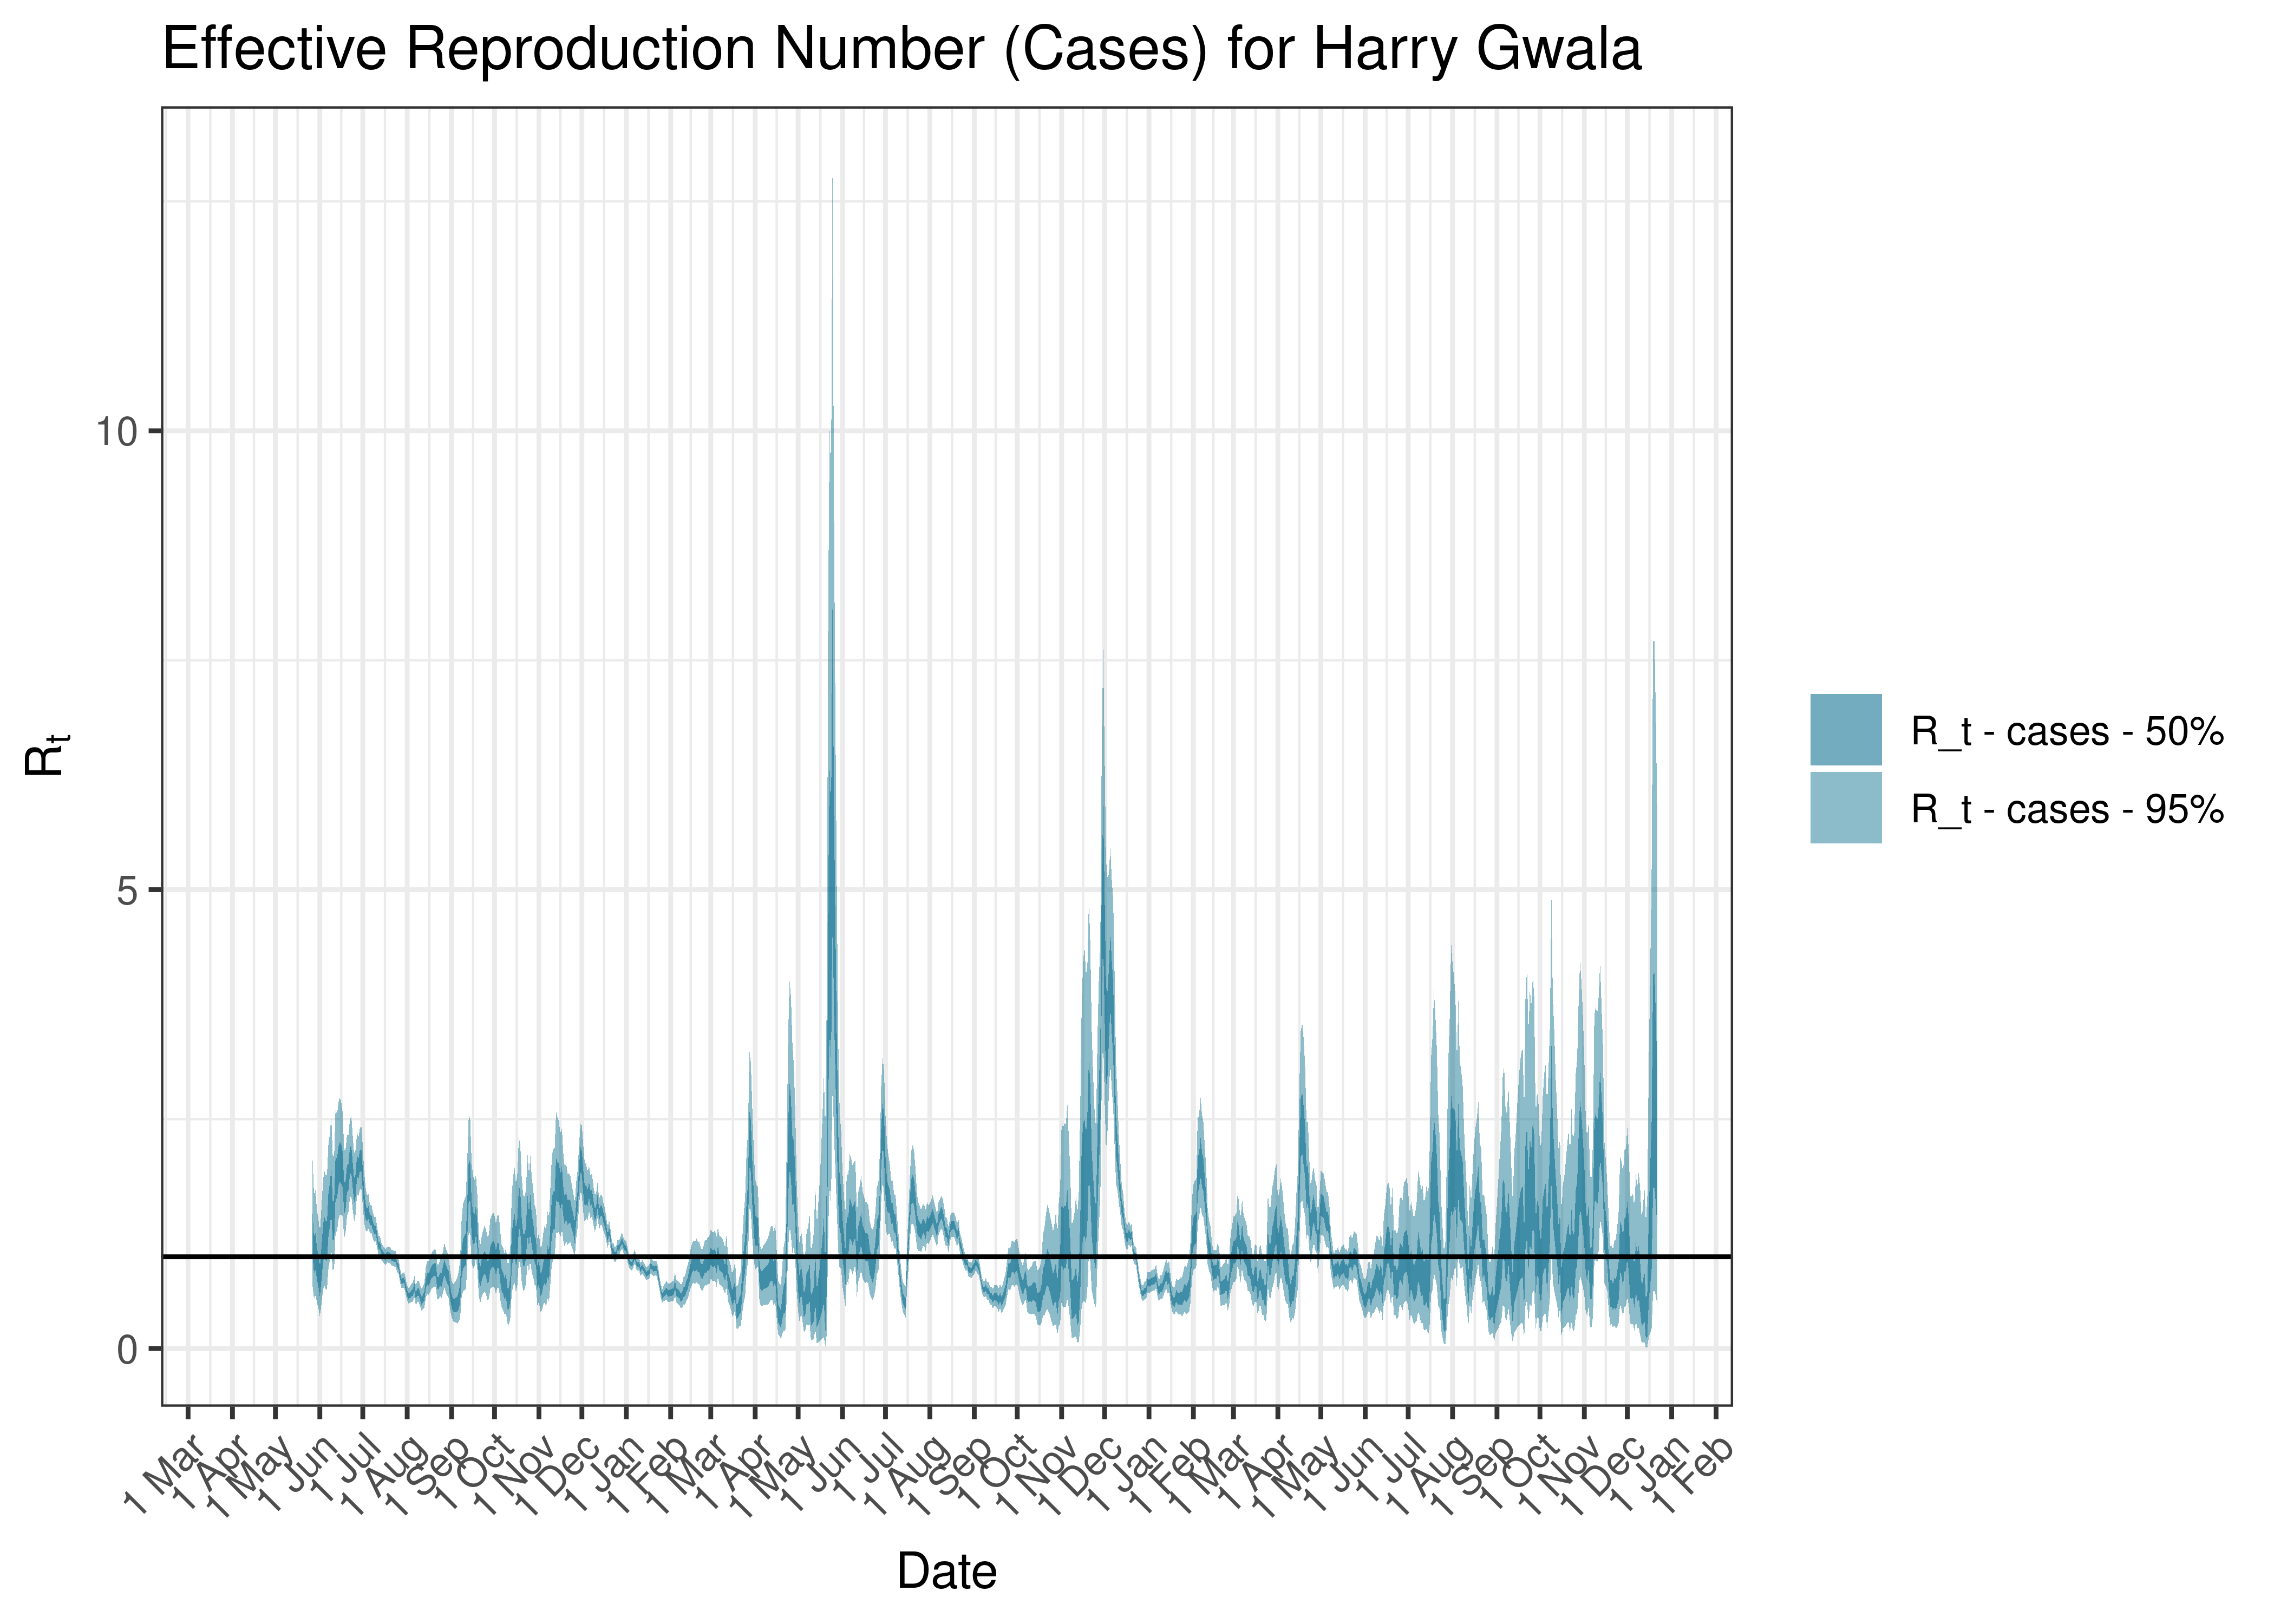 Estimated Effective Reproduction Number Based on Cases for Harry Gwala since 1 April 2020